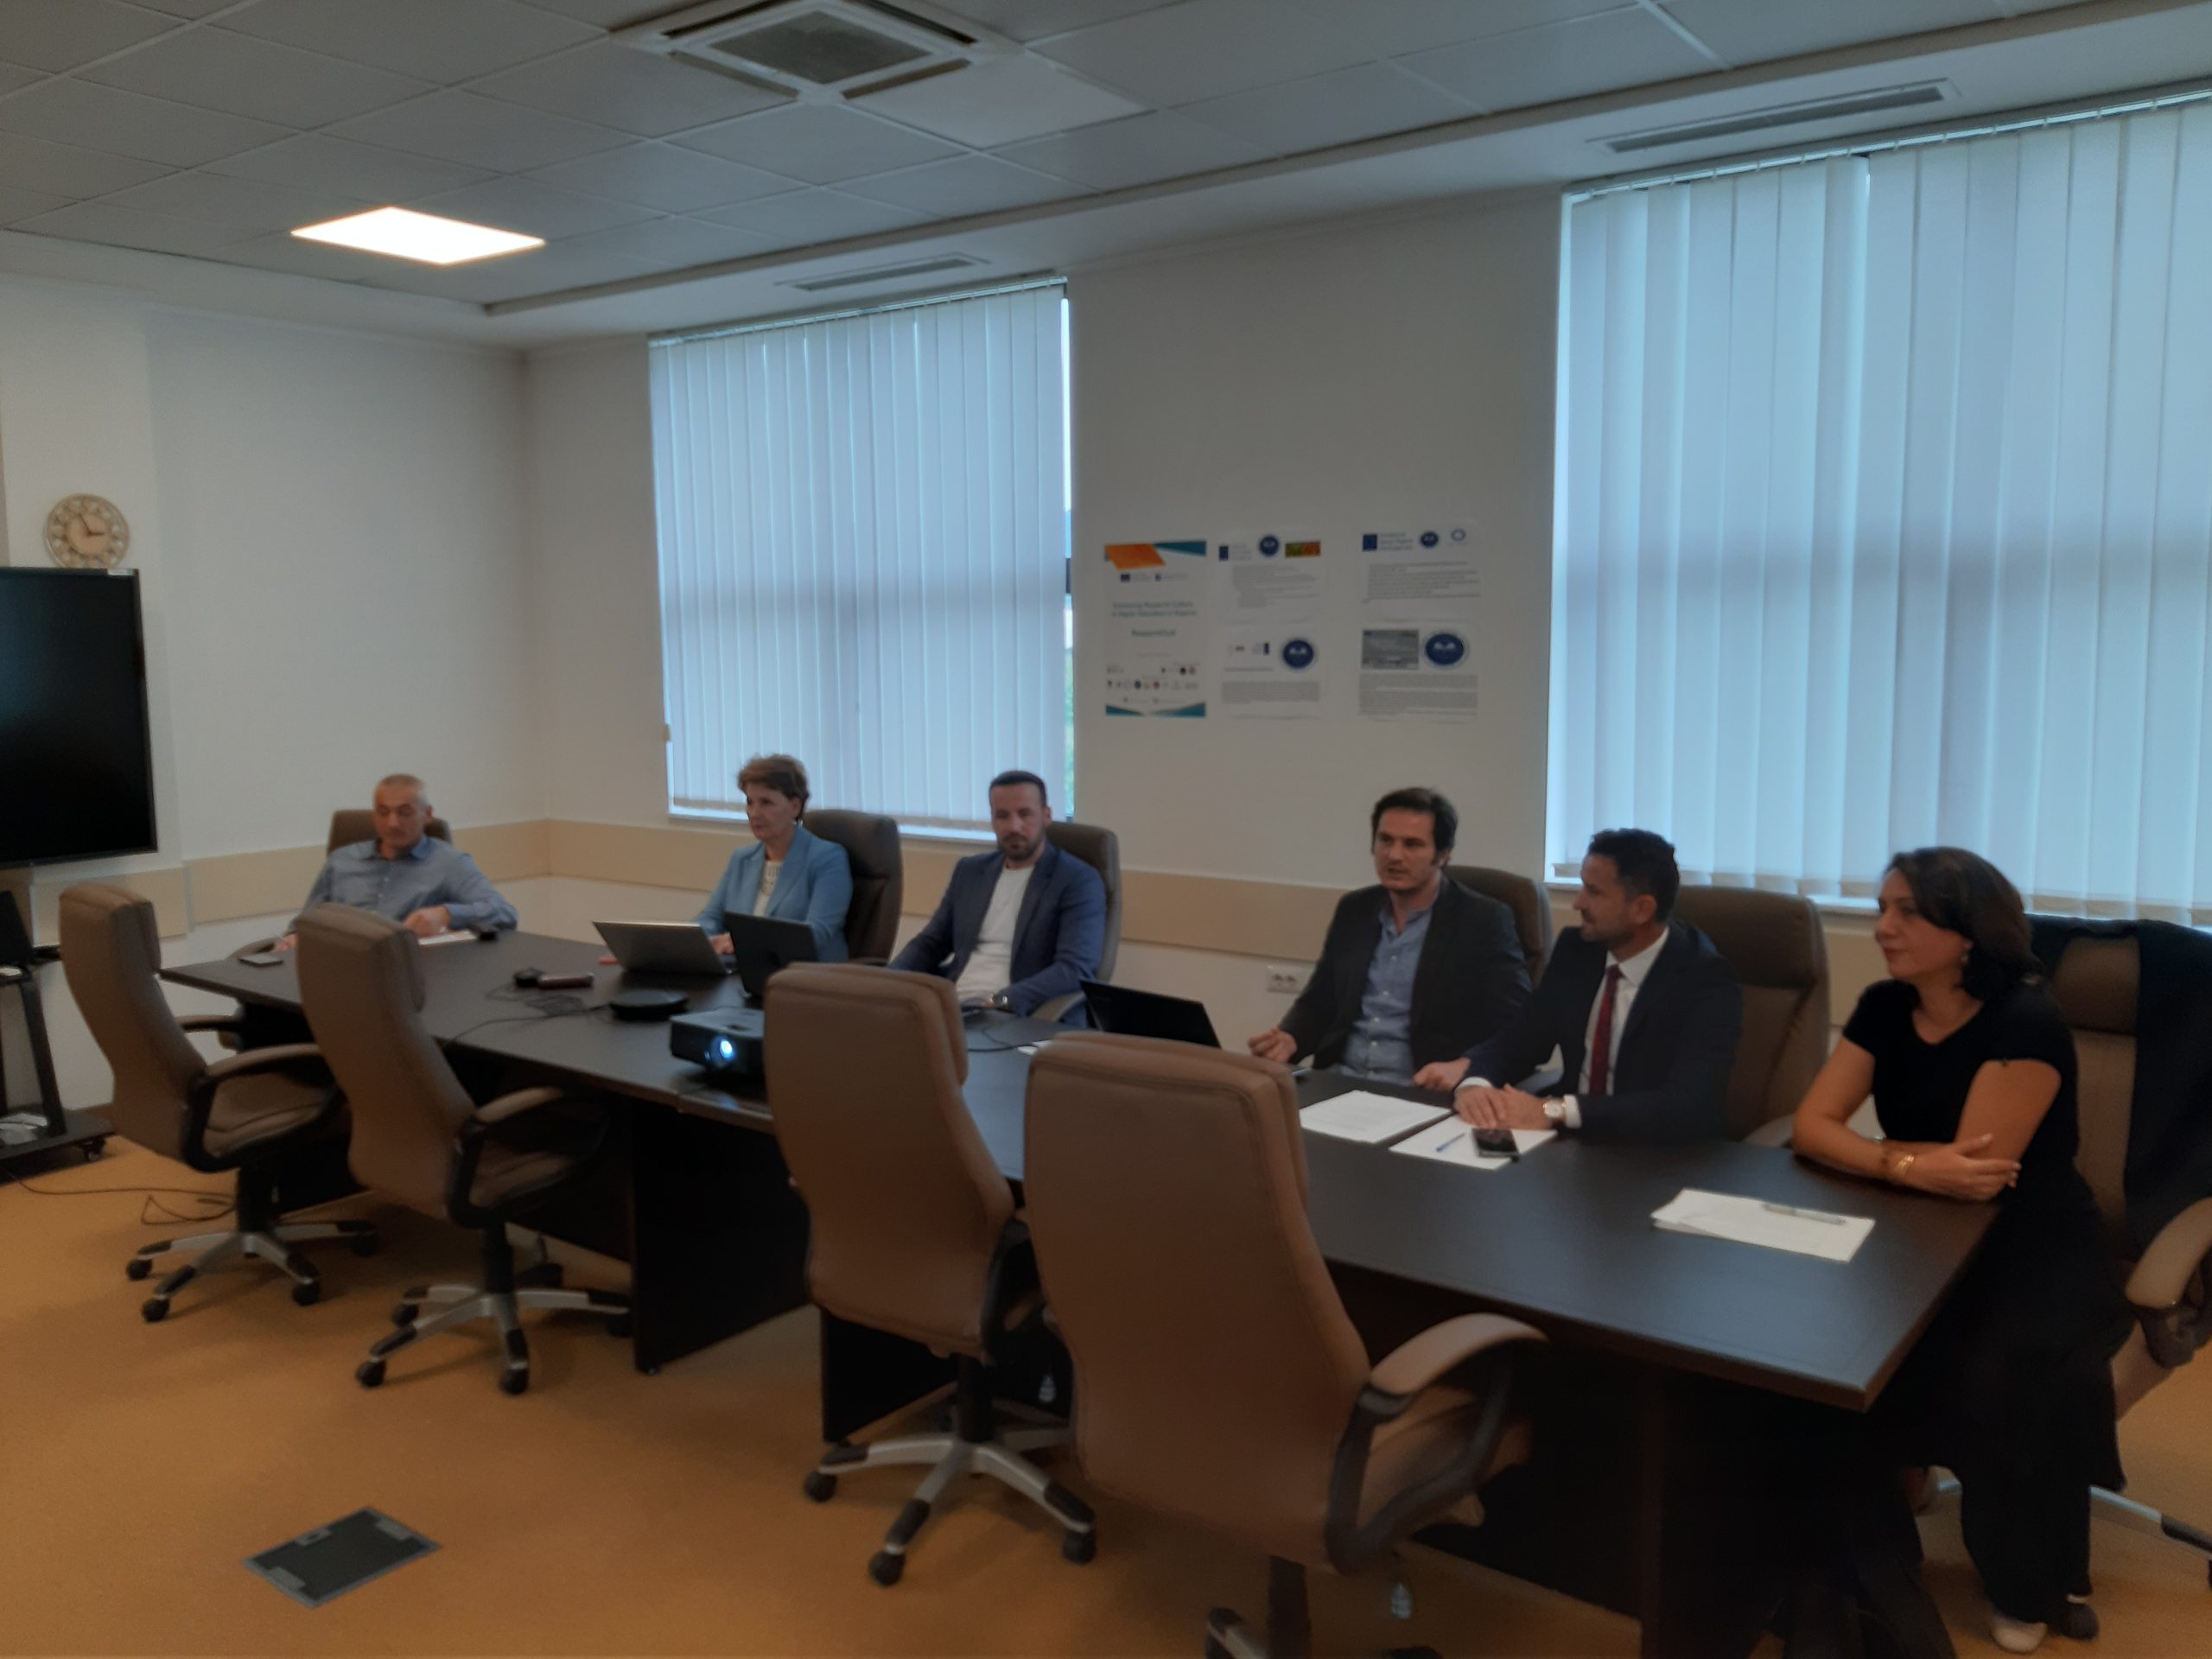 The University Isa Boletini In Mitrovica Held The Kick-off Meeting For The Project “Digitalization Of Enterprise Resource Planning (ERP).”